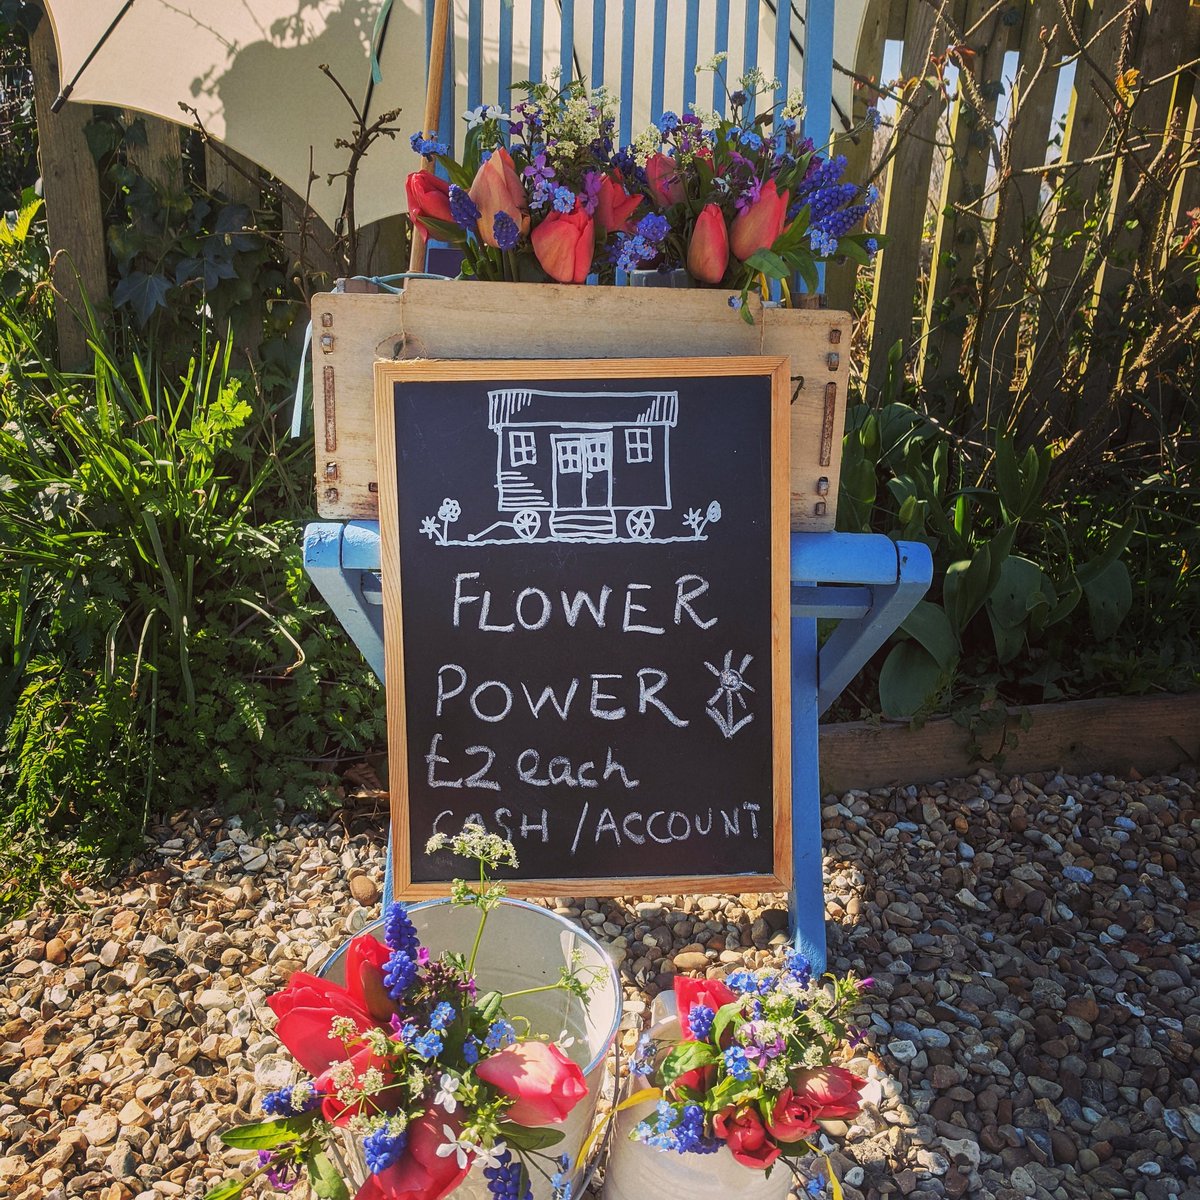 A little bit of #businessdiversification whilst the Hut is off limits. All field grown here and freshly picked this morning. Have sold out today but will have more out tomorrow morning if you're local and passing.
#flowerpower #flowerfarmer #seasonalflowers #SocialDistancing